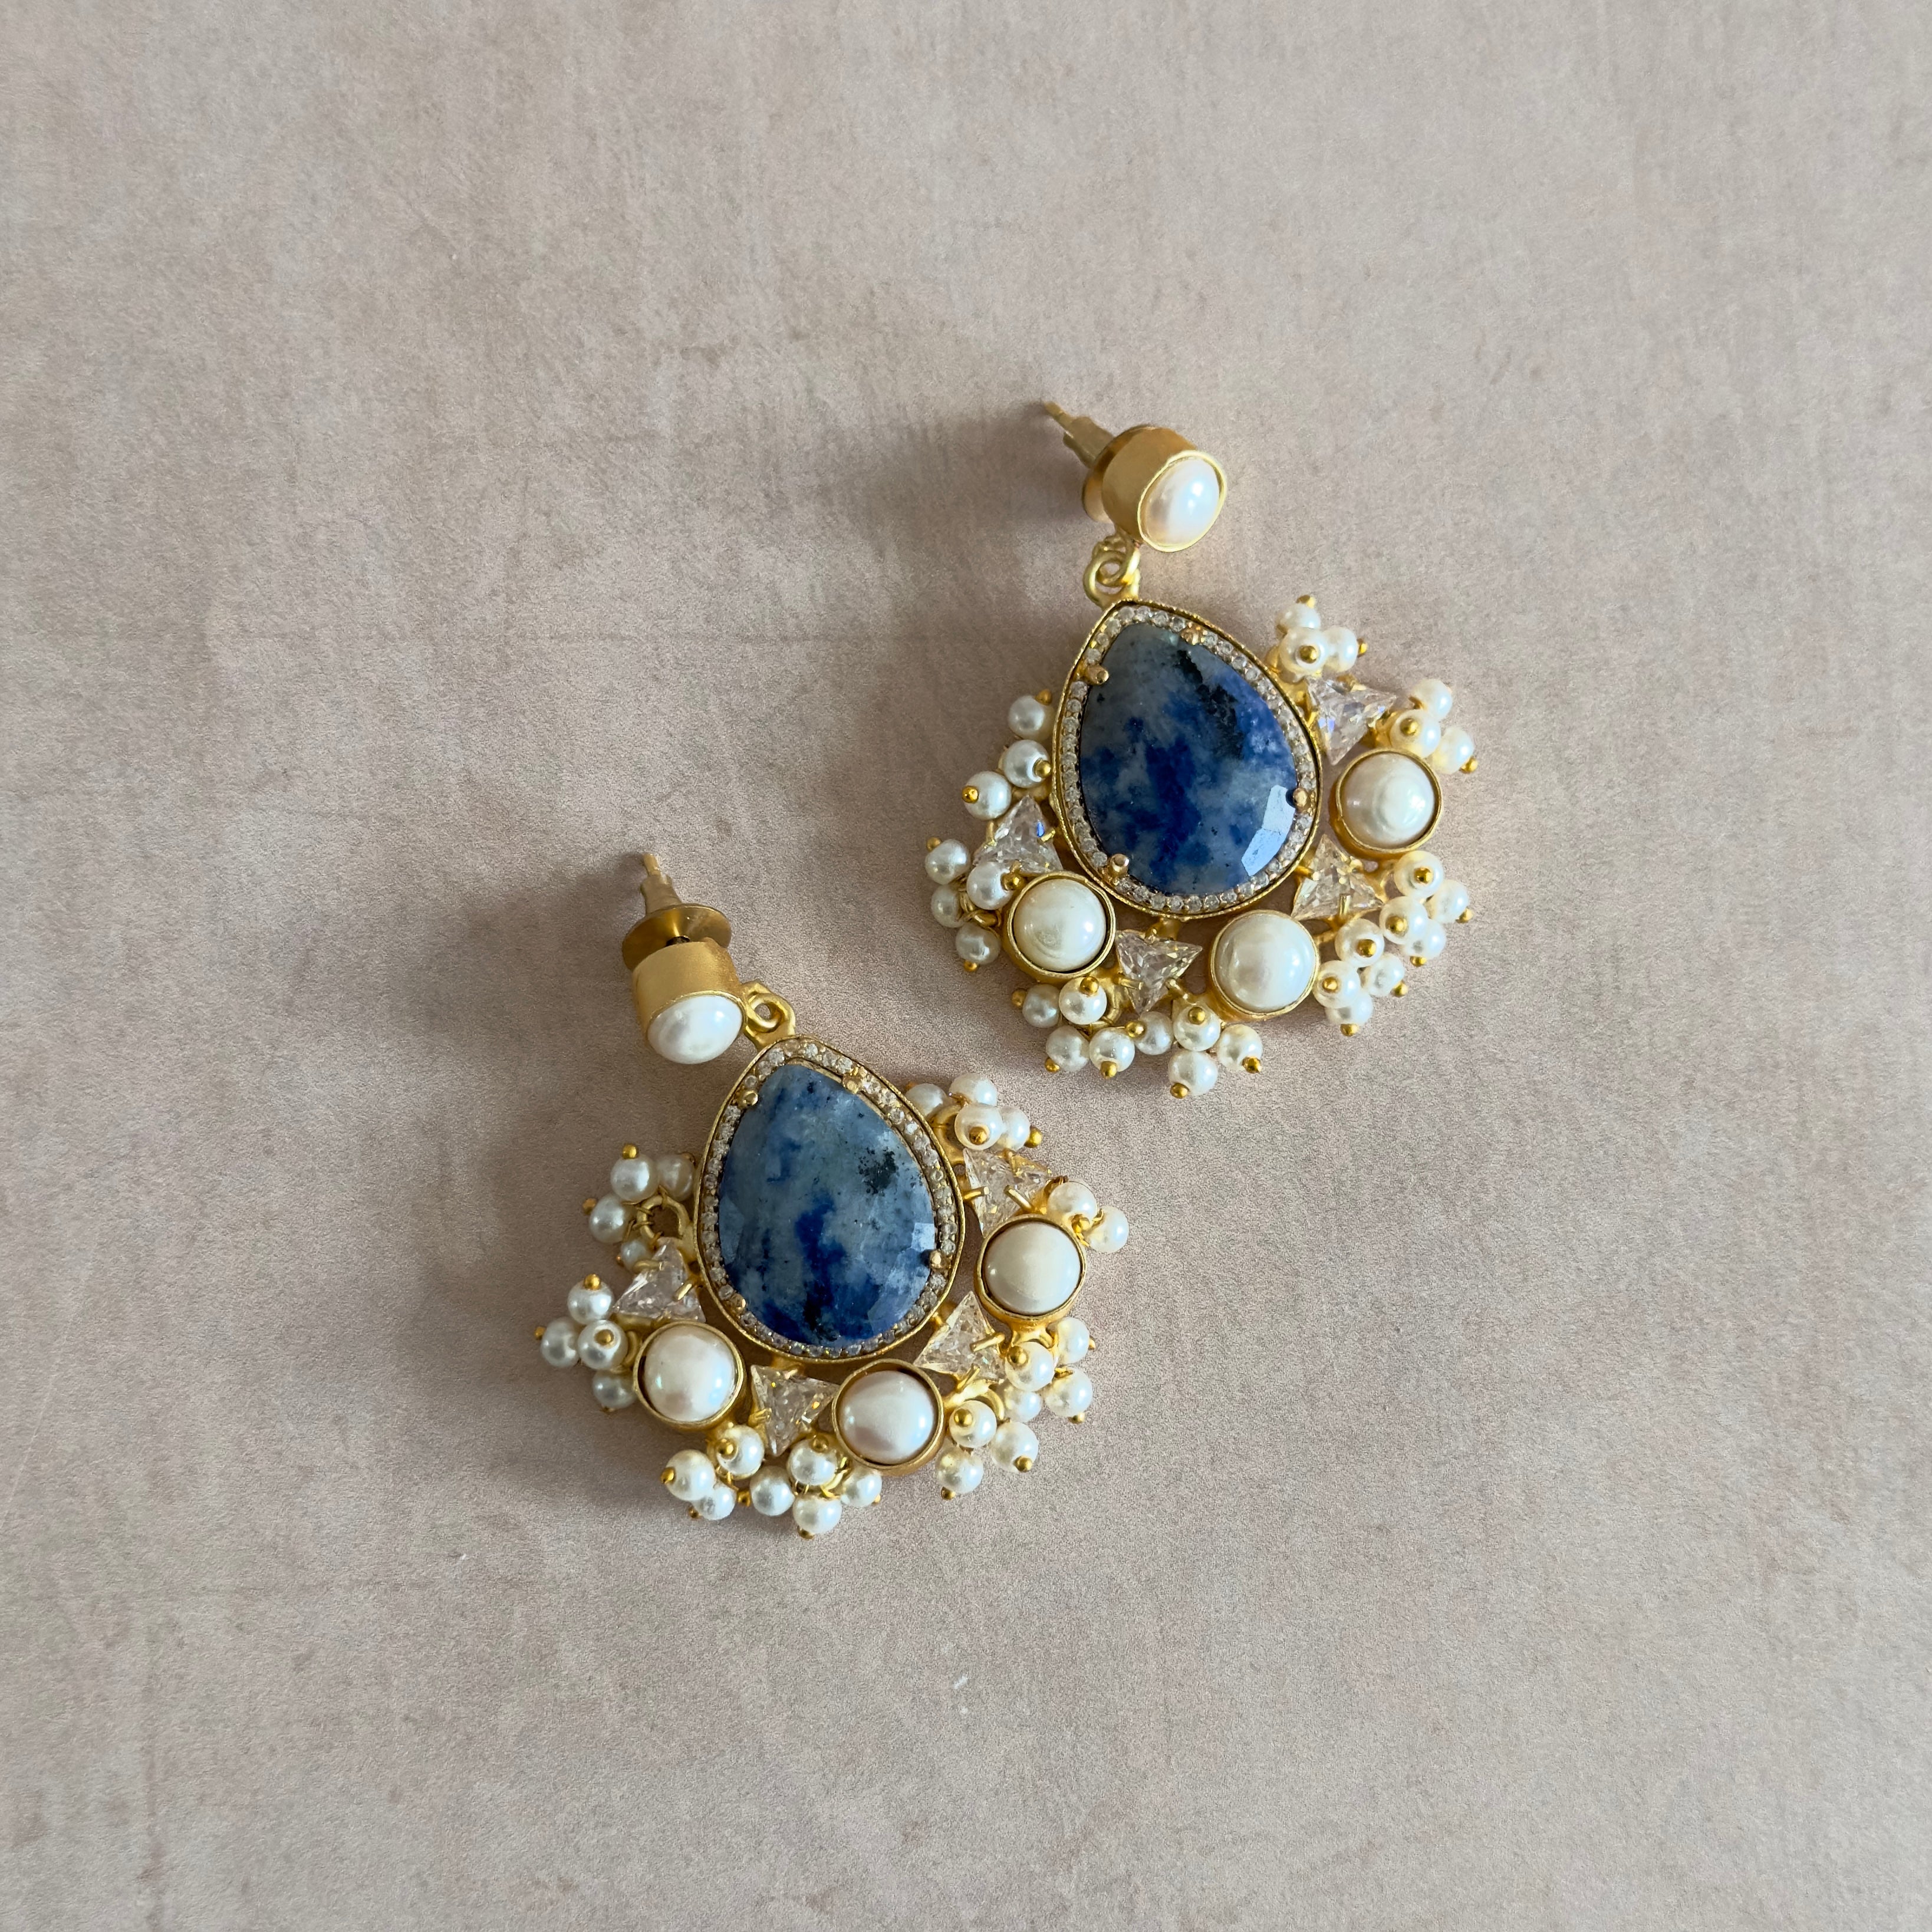 Elevate your style with our Poppy Blue Pearl Drop Earrings! Crafted with natural blue marble gemstones, pearl accents, and sparkling crystal details, these earrings add a touch of elegance to any outfit. Enhance your look with the beauty and uniqueness of these stunning earrings.